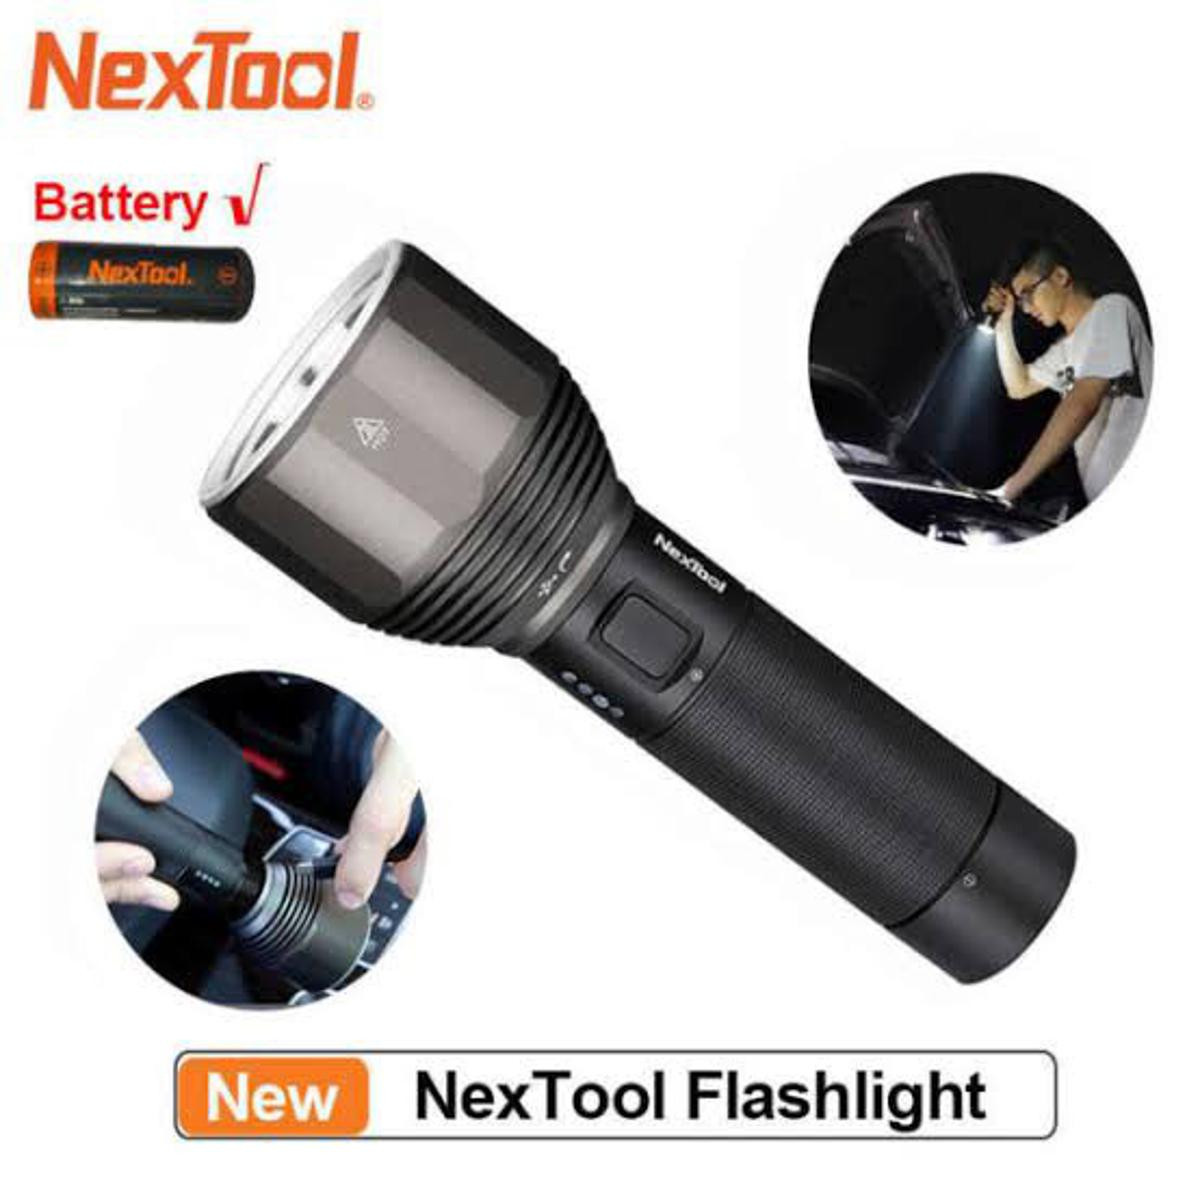 Xiaomi Nextool LED Torch IPX7 Waterproof 2000LM Super Bright 5-Mode Rechargeable Outdoor Flash light With Type-C Charging Port